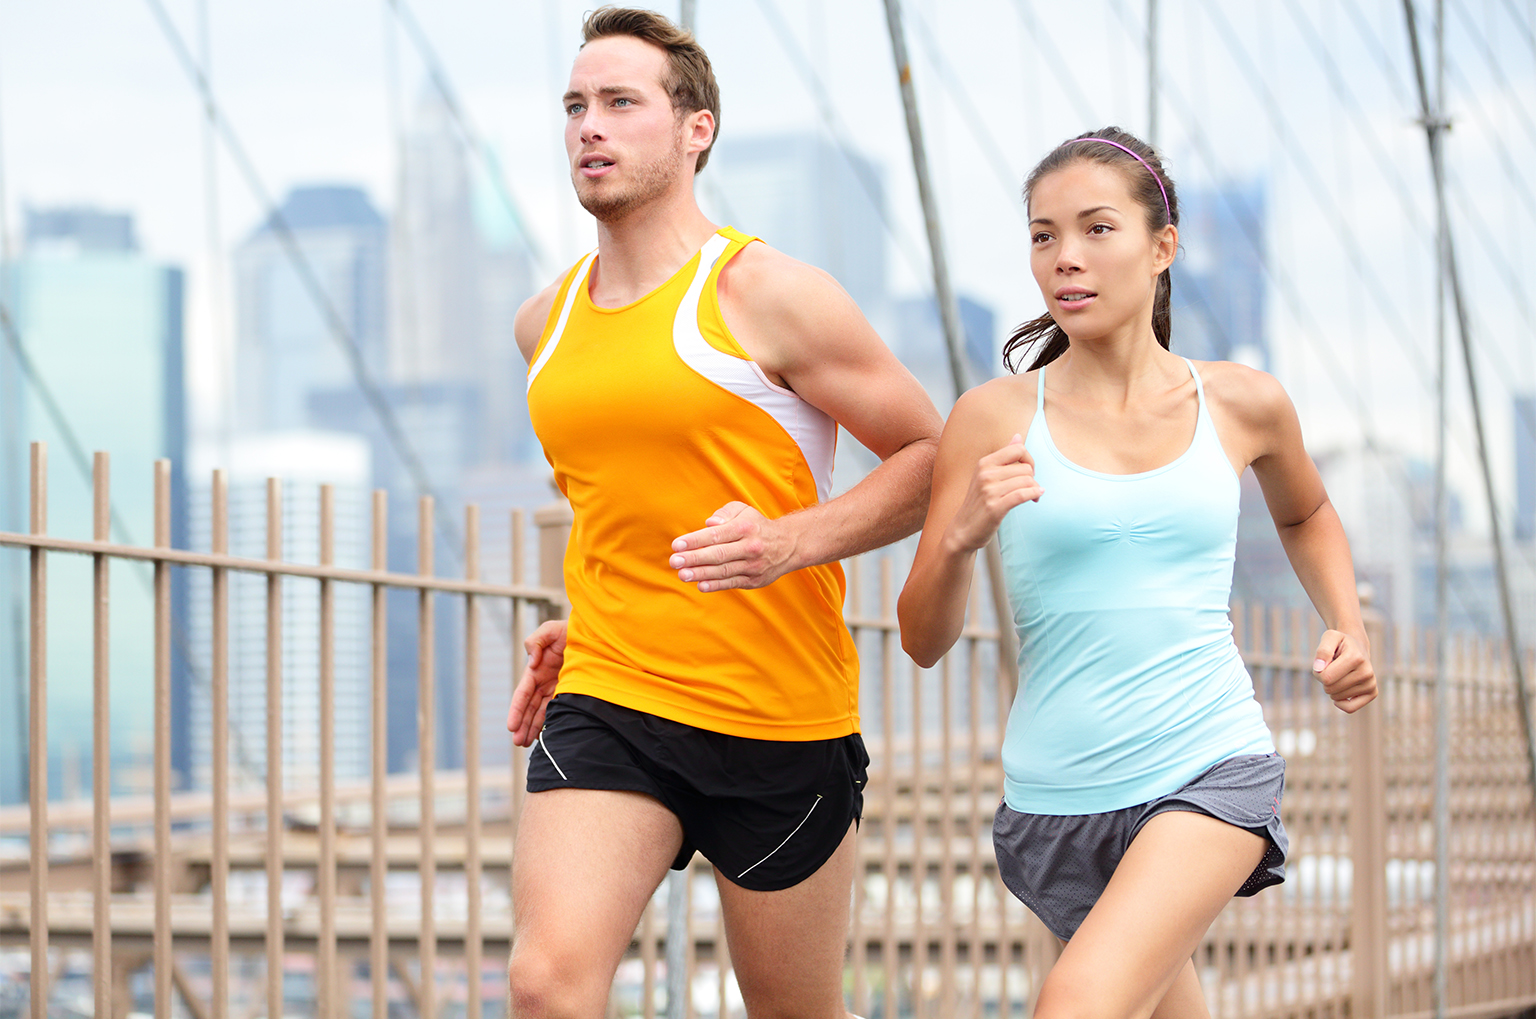 “Running Outdoors? Protect Your Skin from These Common Hazards!”